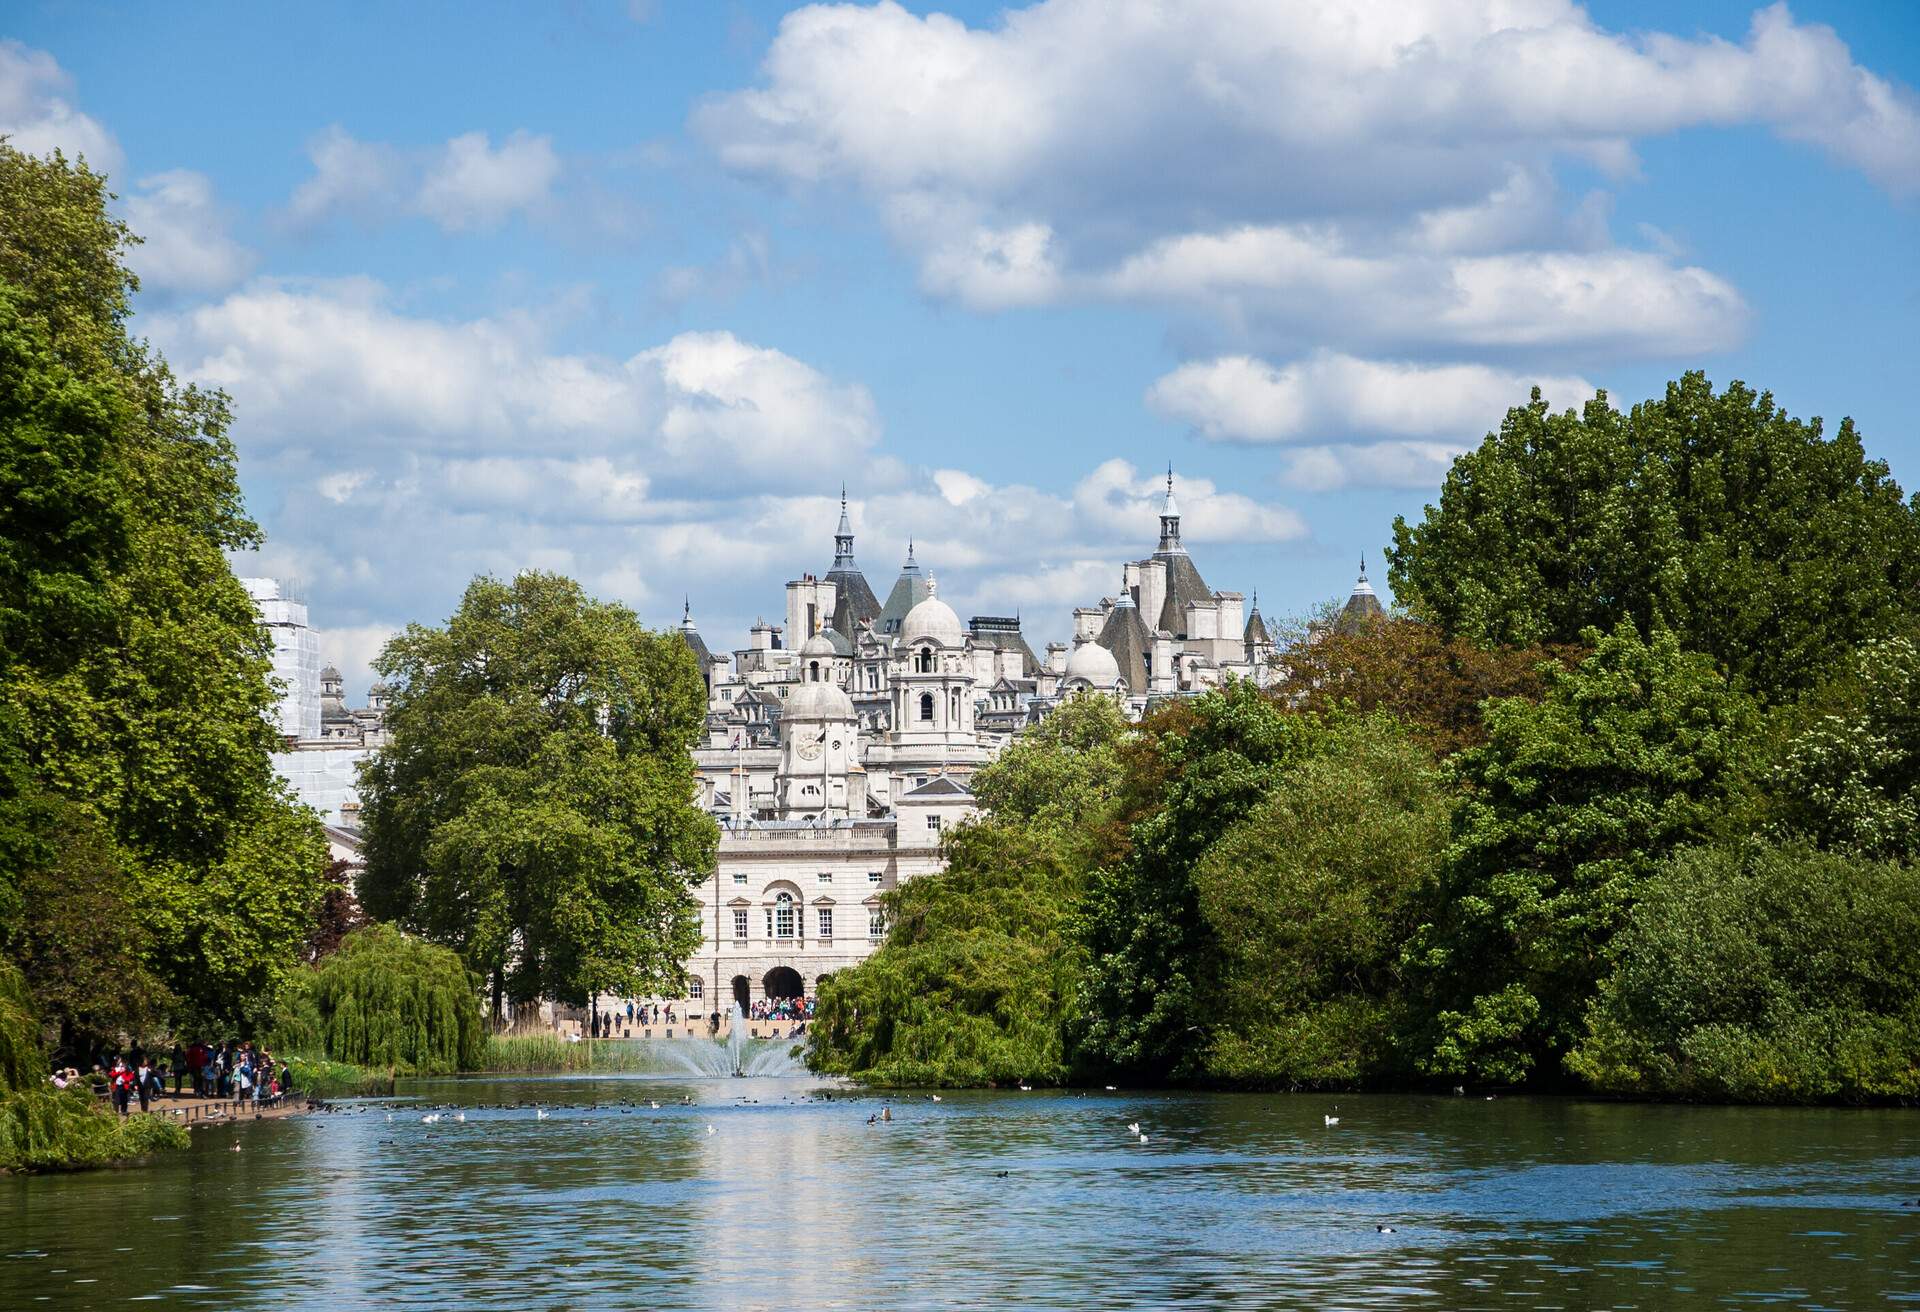 A cityscape view through the Serpentine lake in Hyde Park, Kensington Gardens in sunny day. London UK.; Shutterstock ID 192827669; Purchase Order: SF-06928905; Job: ; Client/Licensee: ; Other: